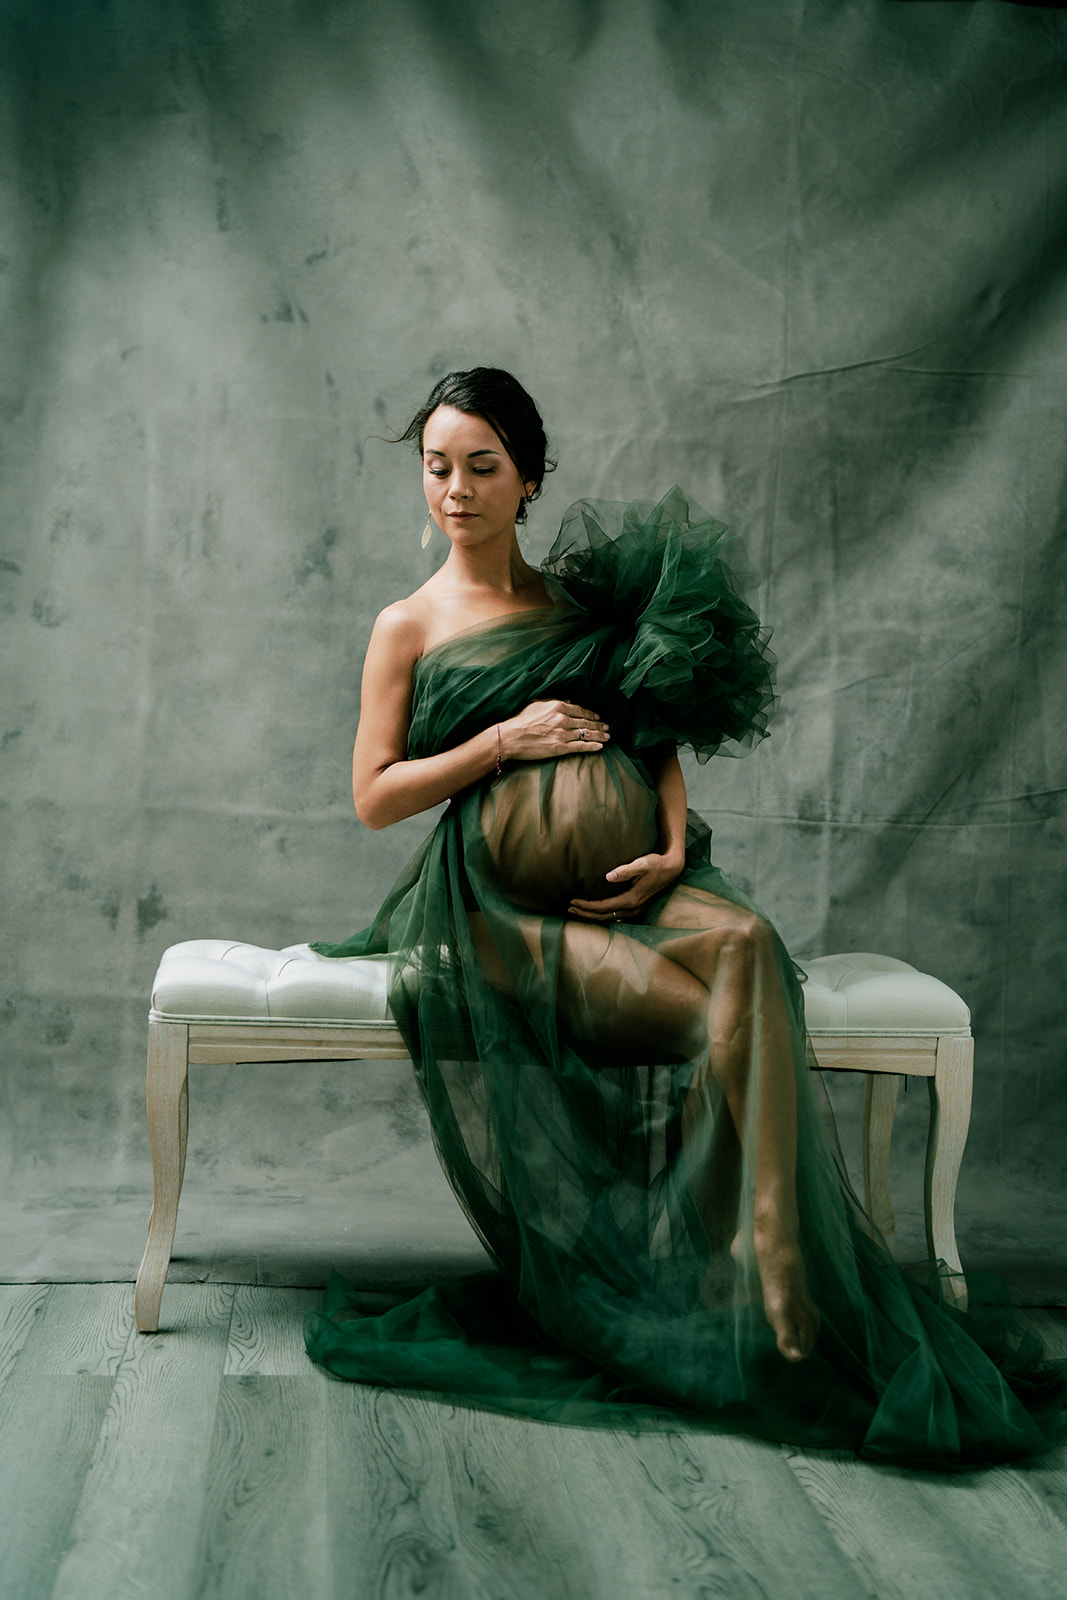 A pregnant woman wearing a green dress, sitting on a bench in studio.